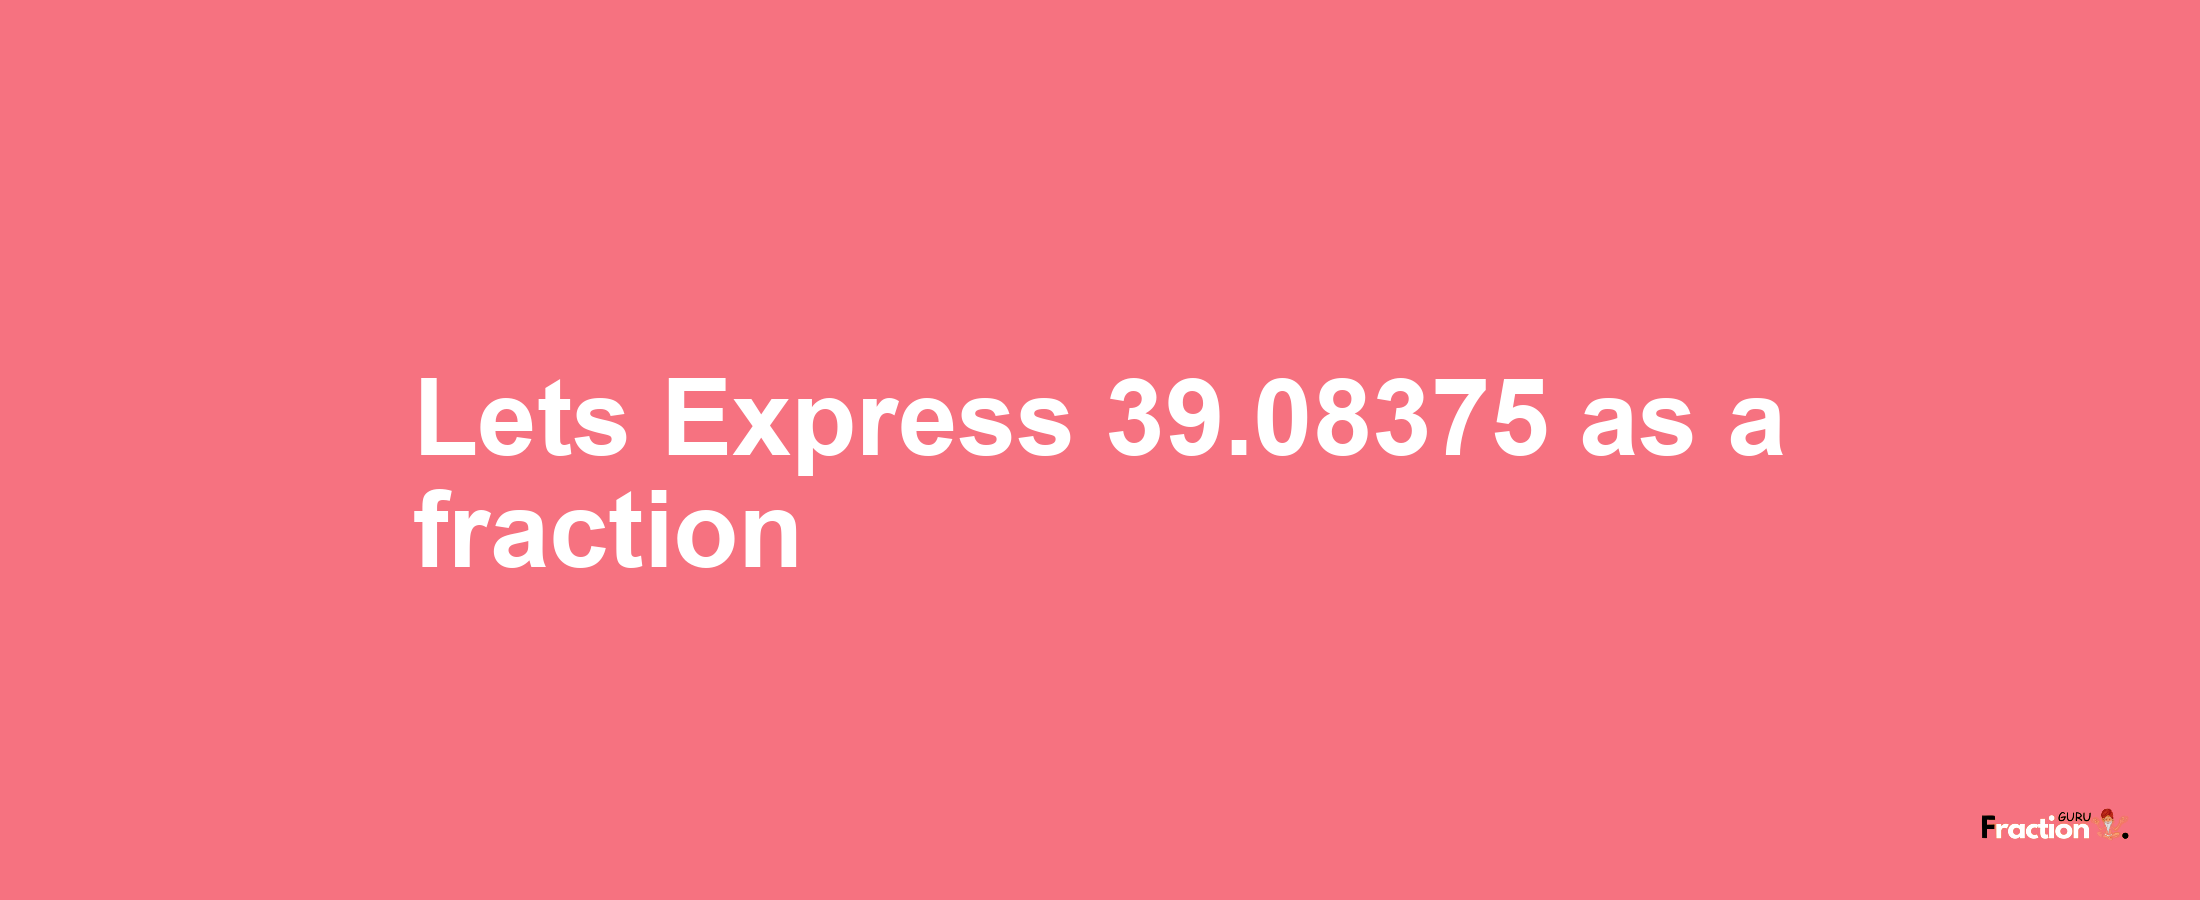 Lets Express 39.08375 as afraction